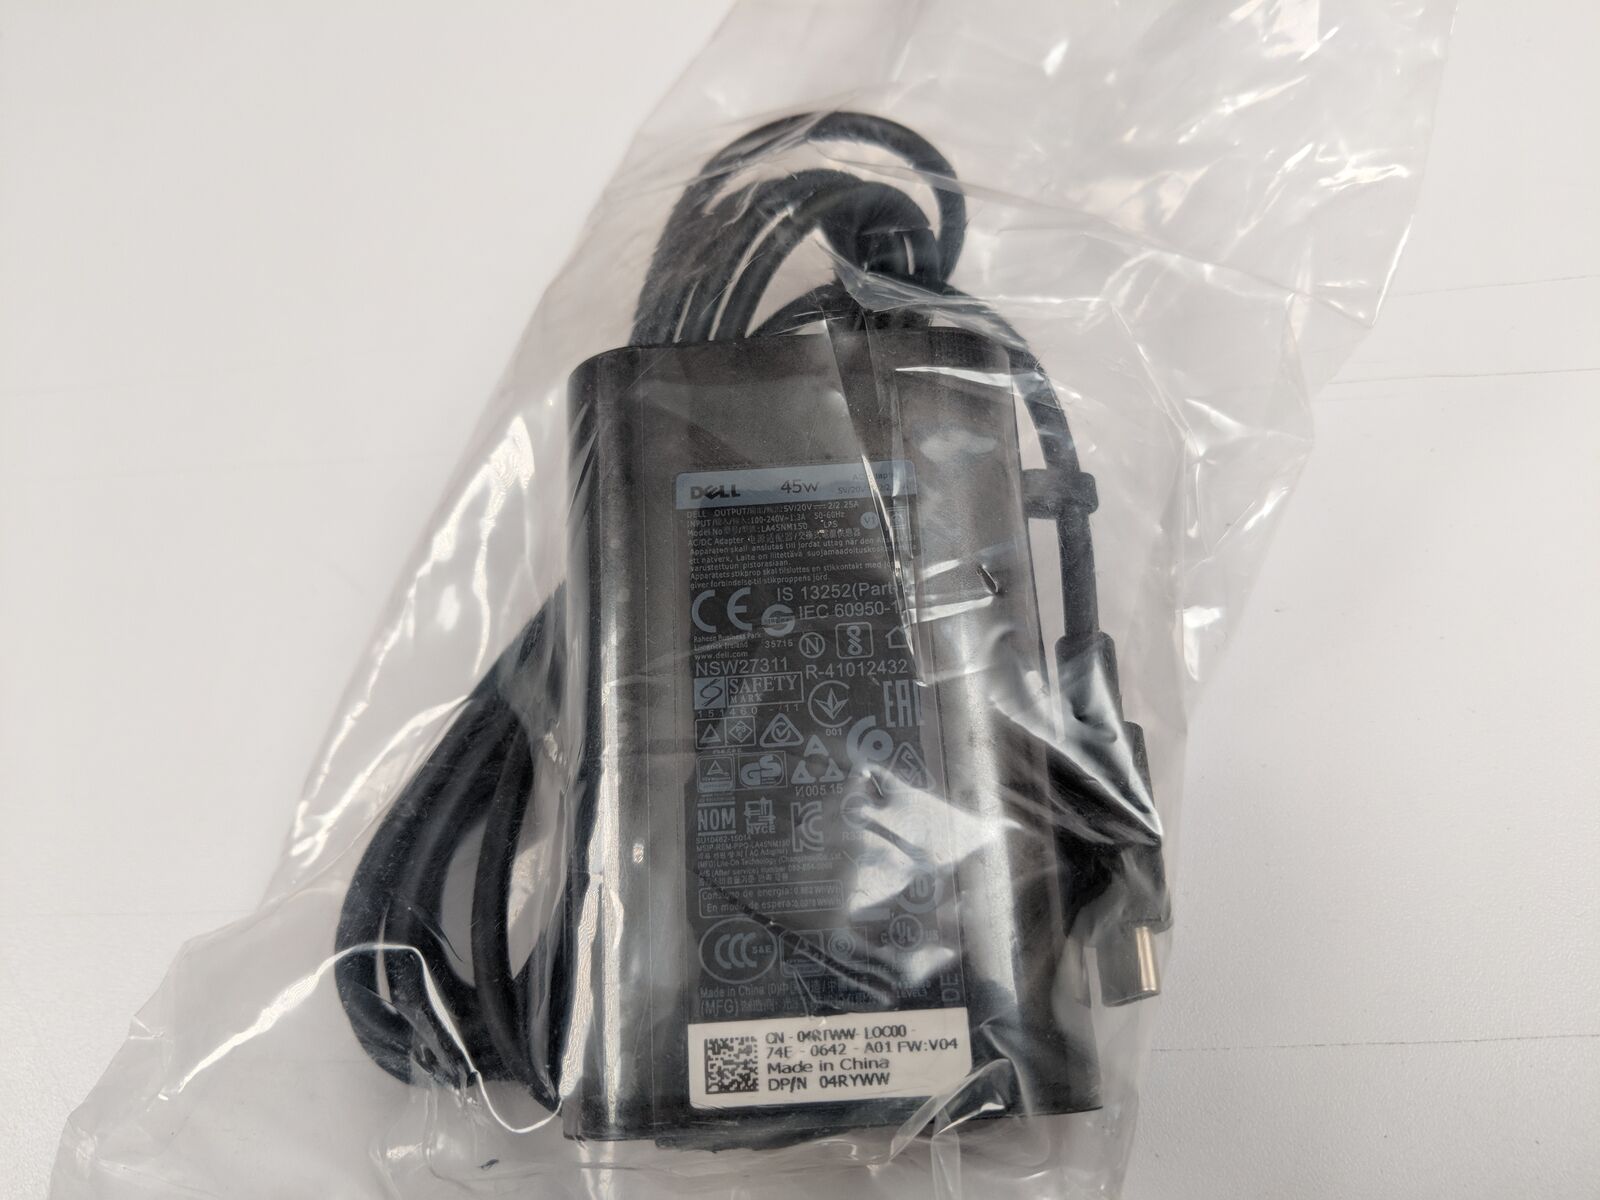 Dell 45W AC Adapter Charger USB-C Type C XPS 13 9365 9370 9380 9300 9310 MPN: LA45NM150 689C4 HDCY5 8XTW5 Brand: Del - Click Image to Close